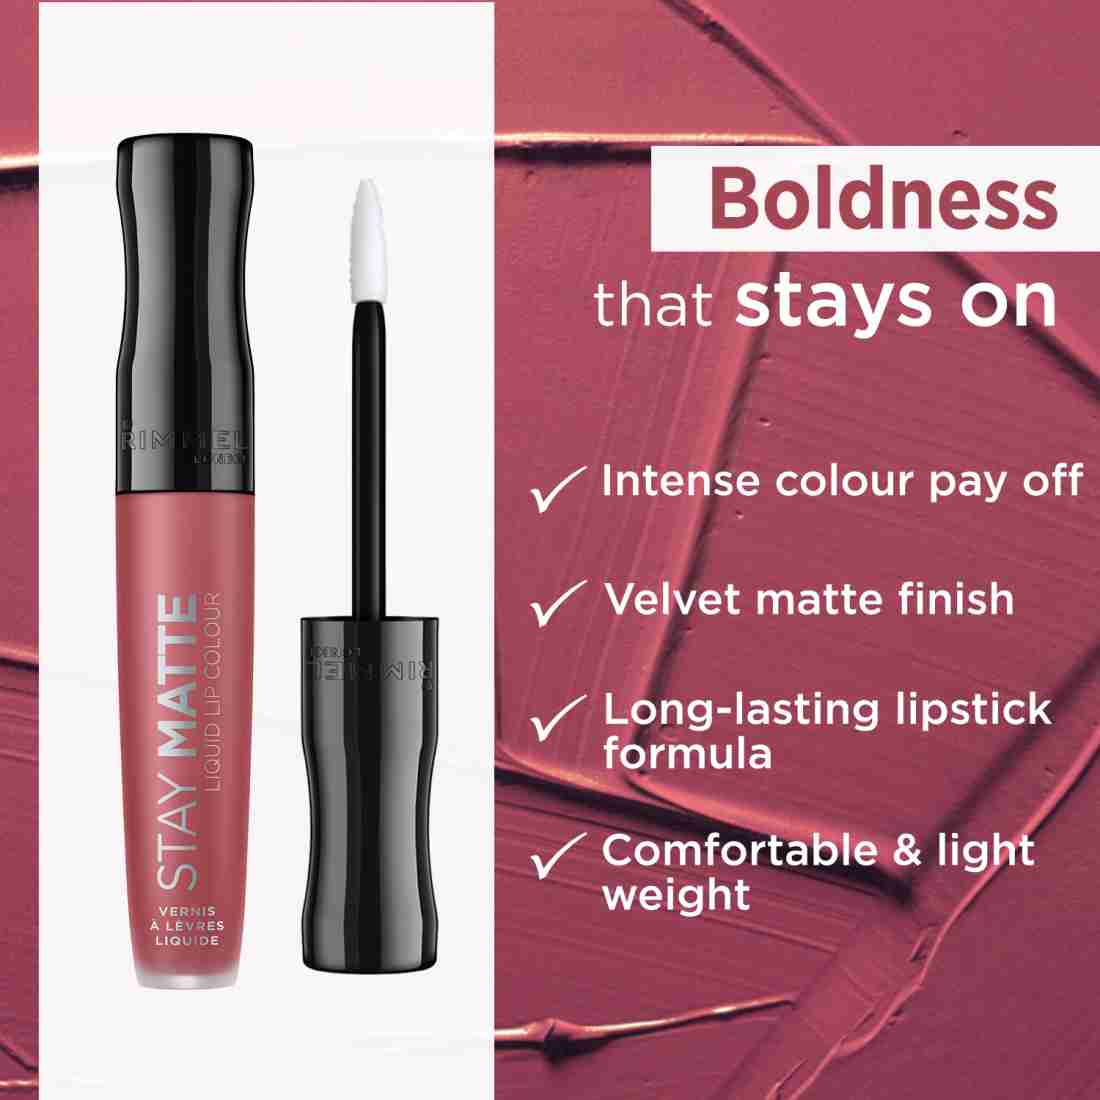 Rimmel London Stay Matte Liquid Lip Colour Pink Bliss - Price in